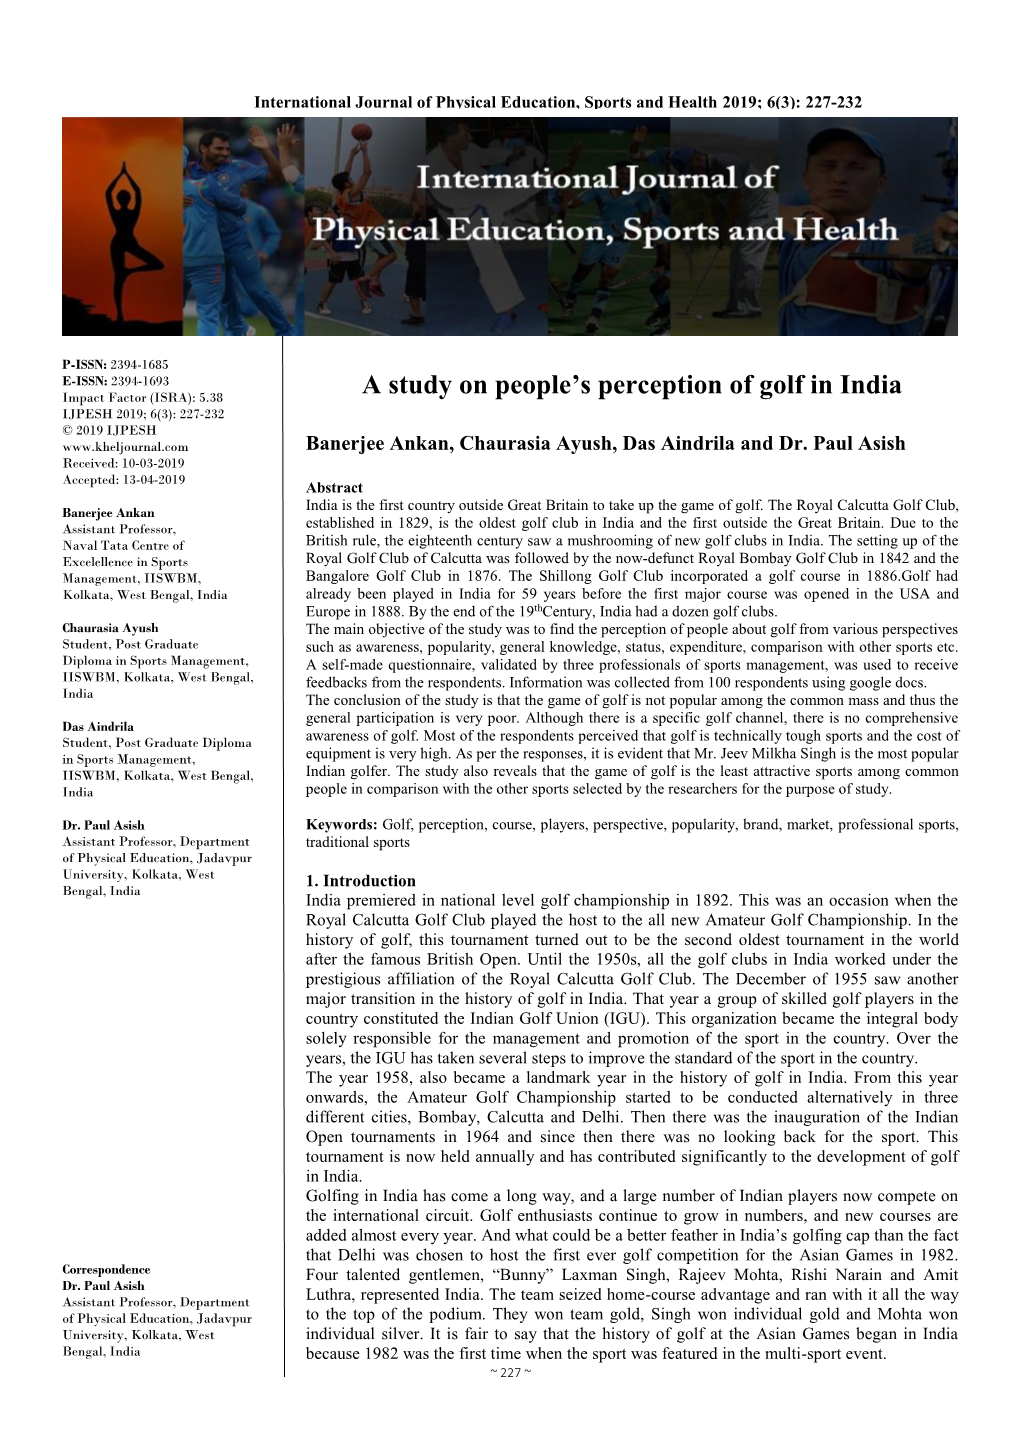 A Study on People's Perception of Golf in India